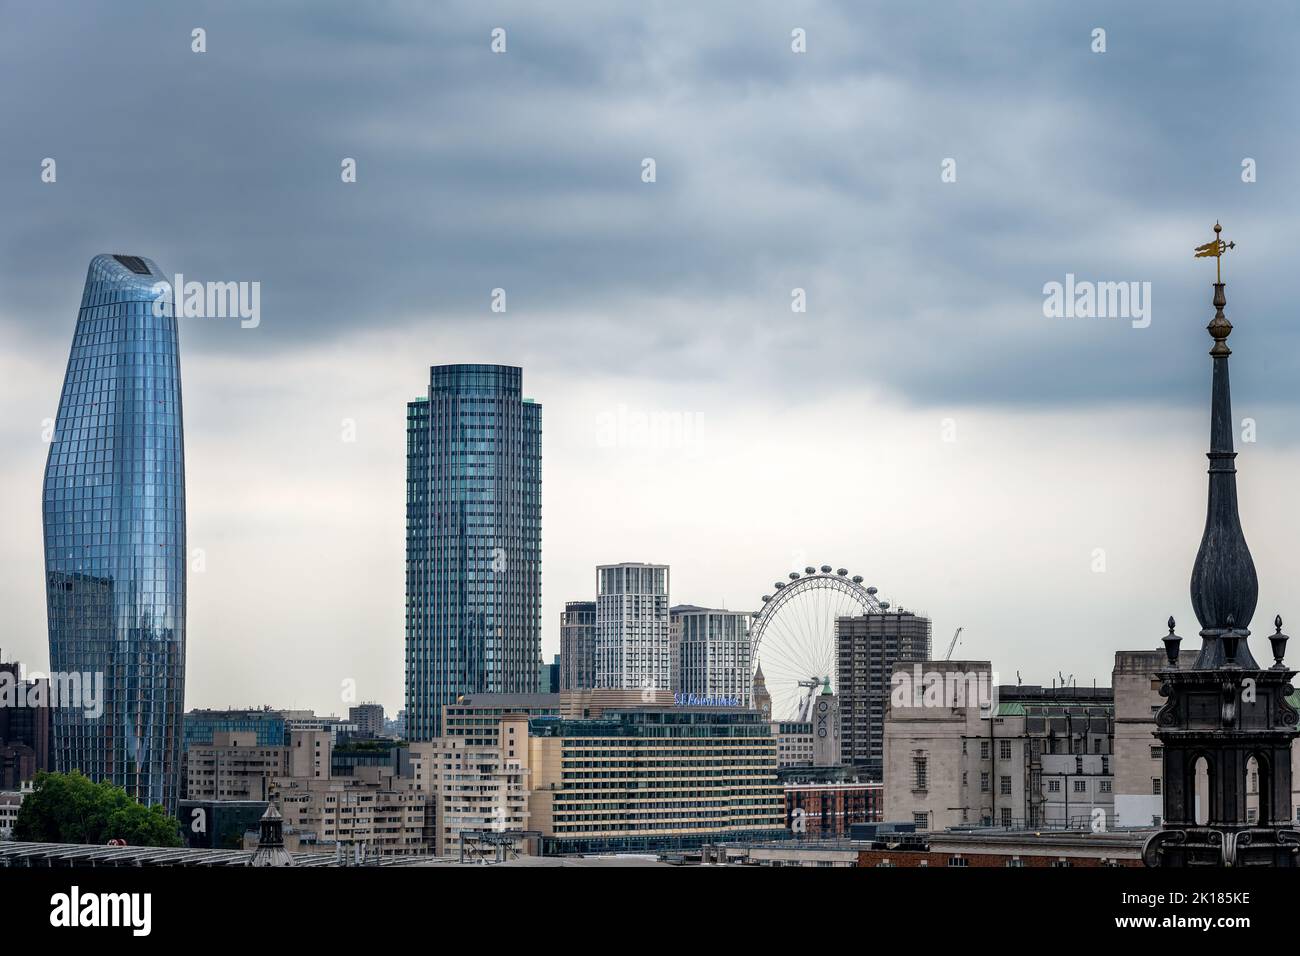 LONDON, ENGLAND - JULY 21st, 2022: View of some iconic buildings of London, the London Eye and the steeple of St Augustine Watling Street Stock Photo